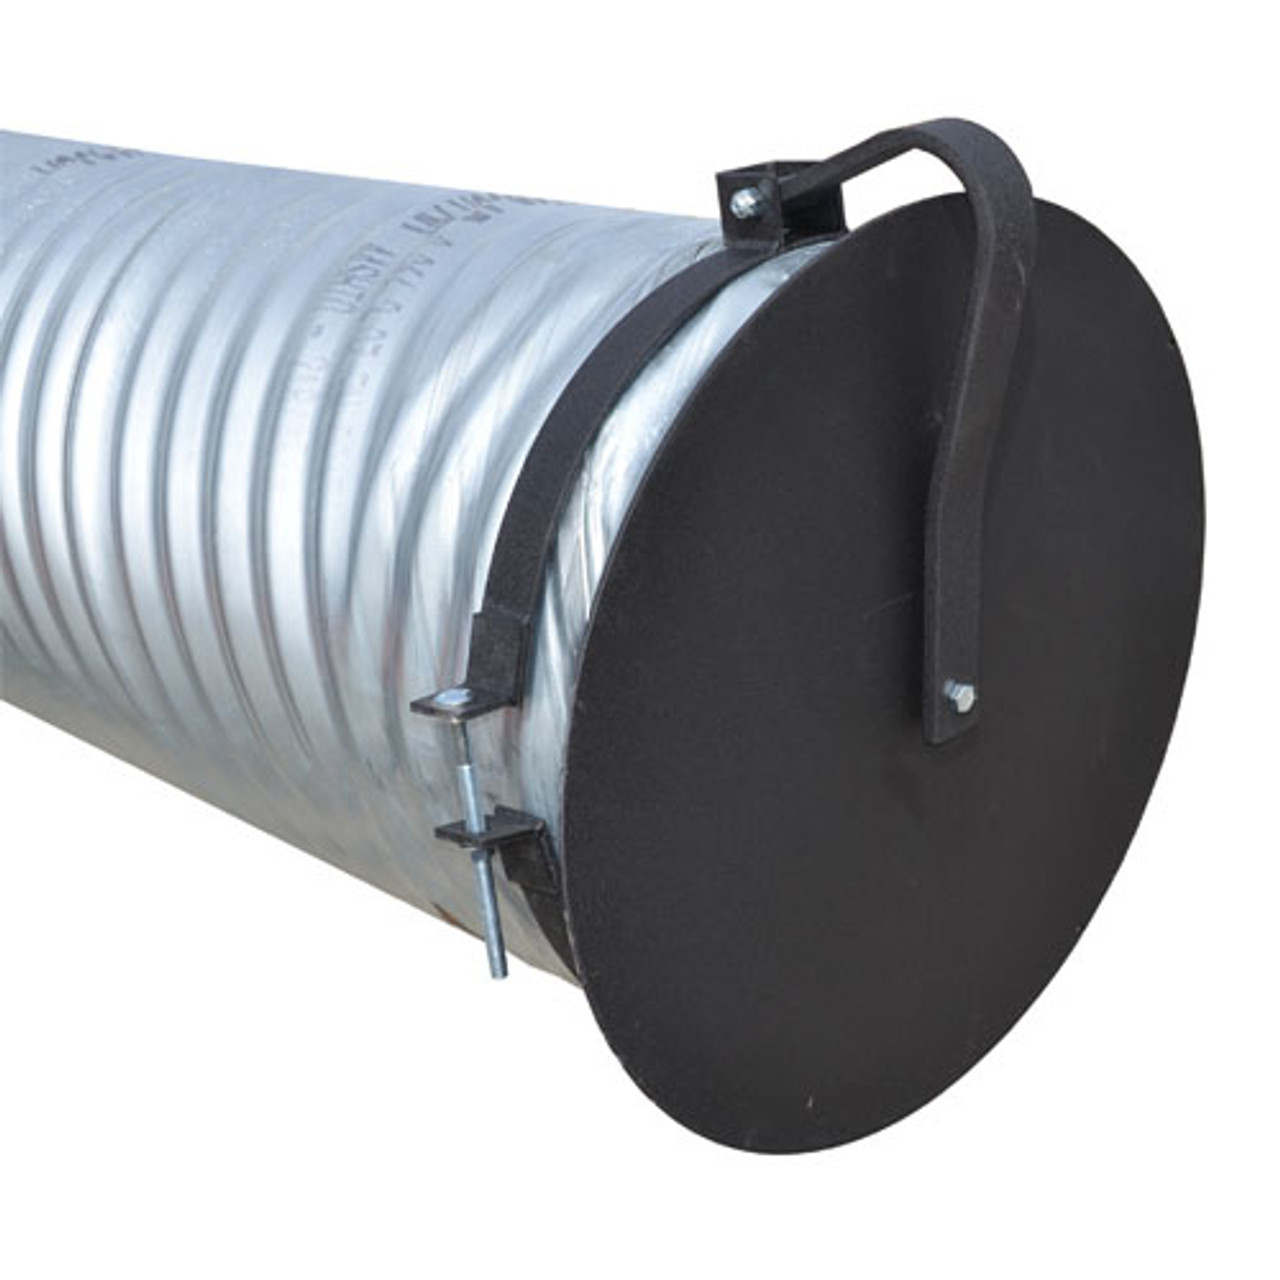 Flap Gate 24" Standard The Drainage Products Store